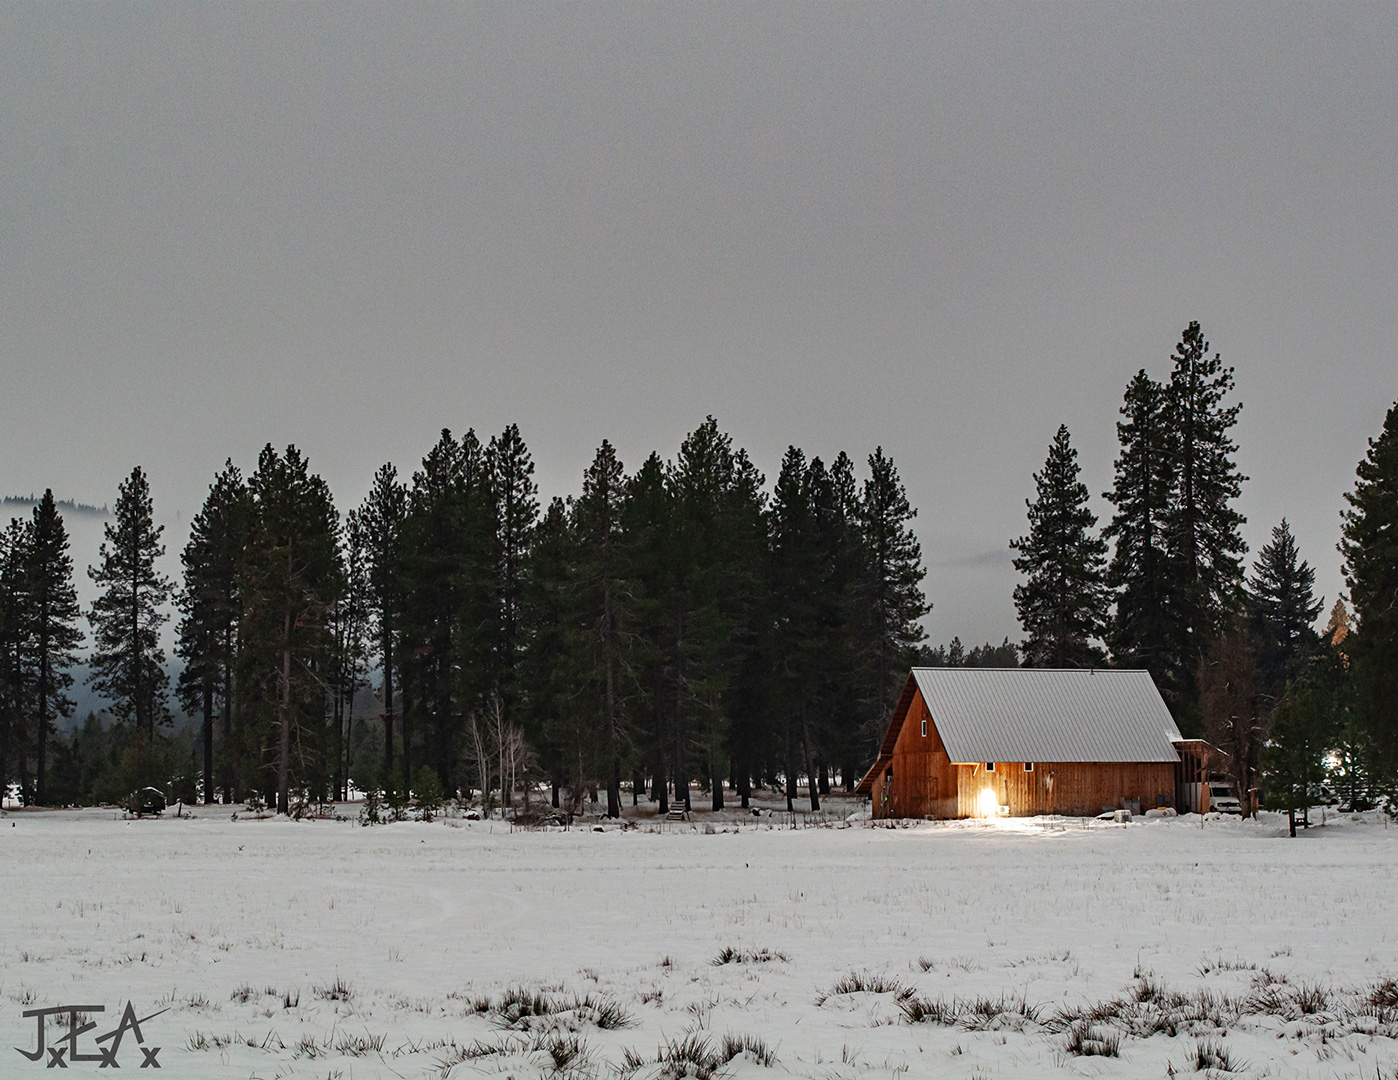 A farmhouse with light in the window sits in a snowwy field backed by evergreens on a winter night.